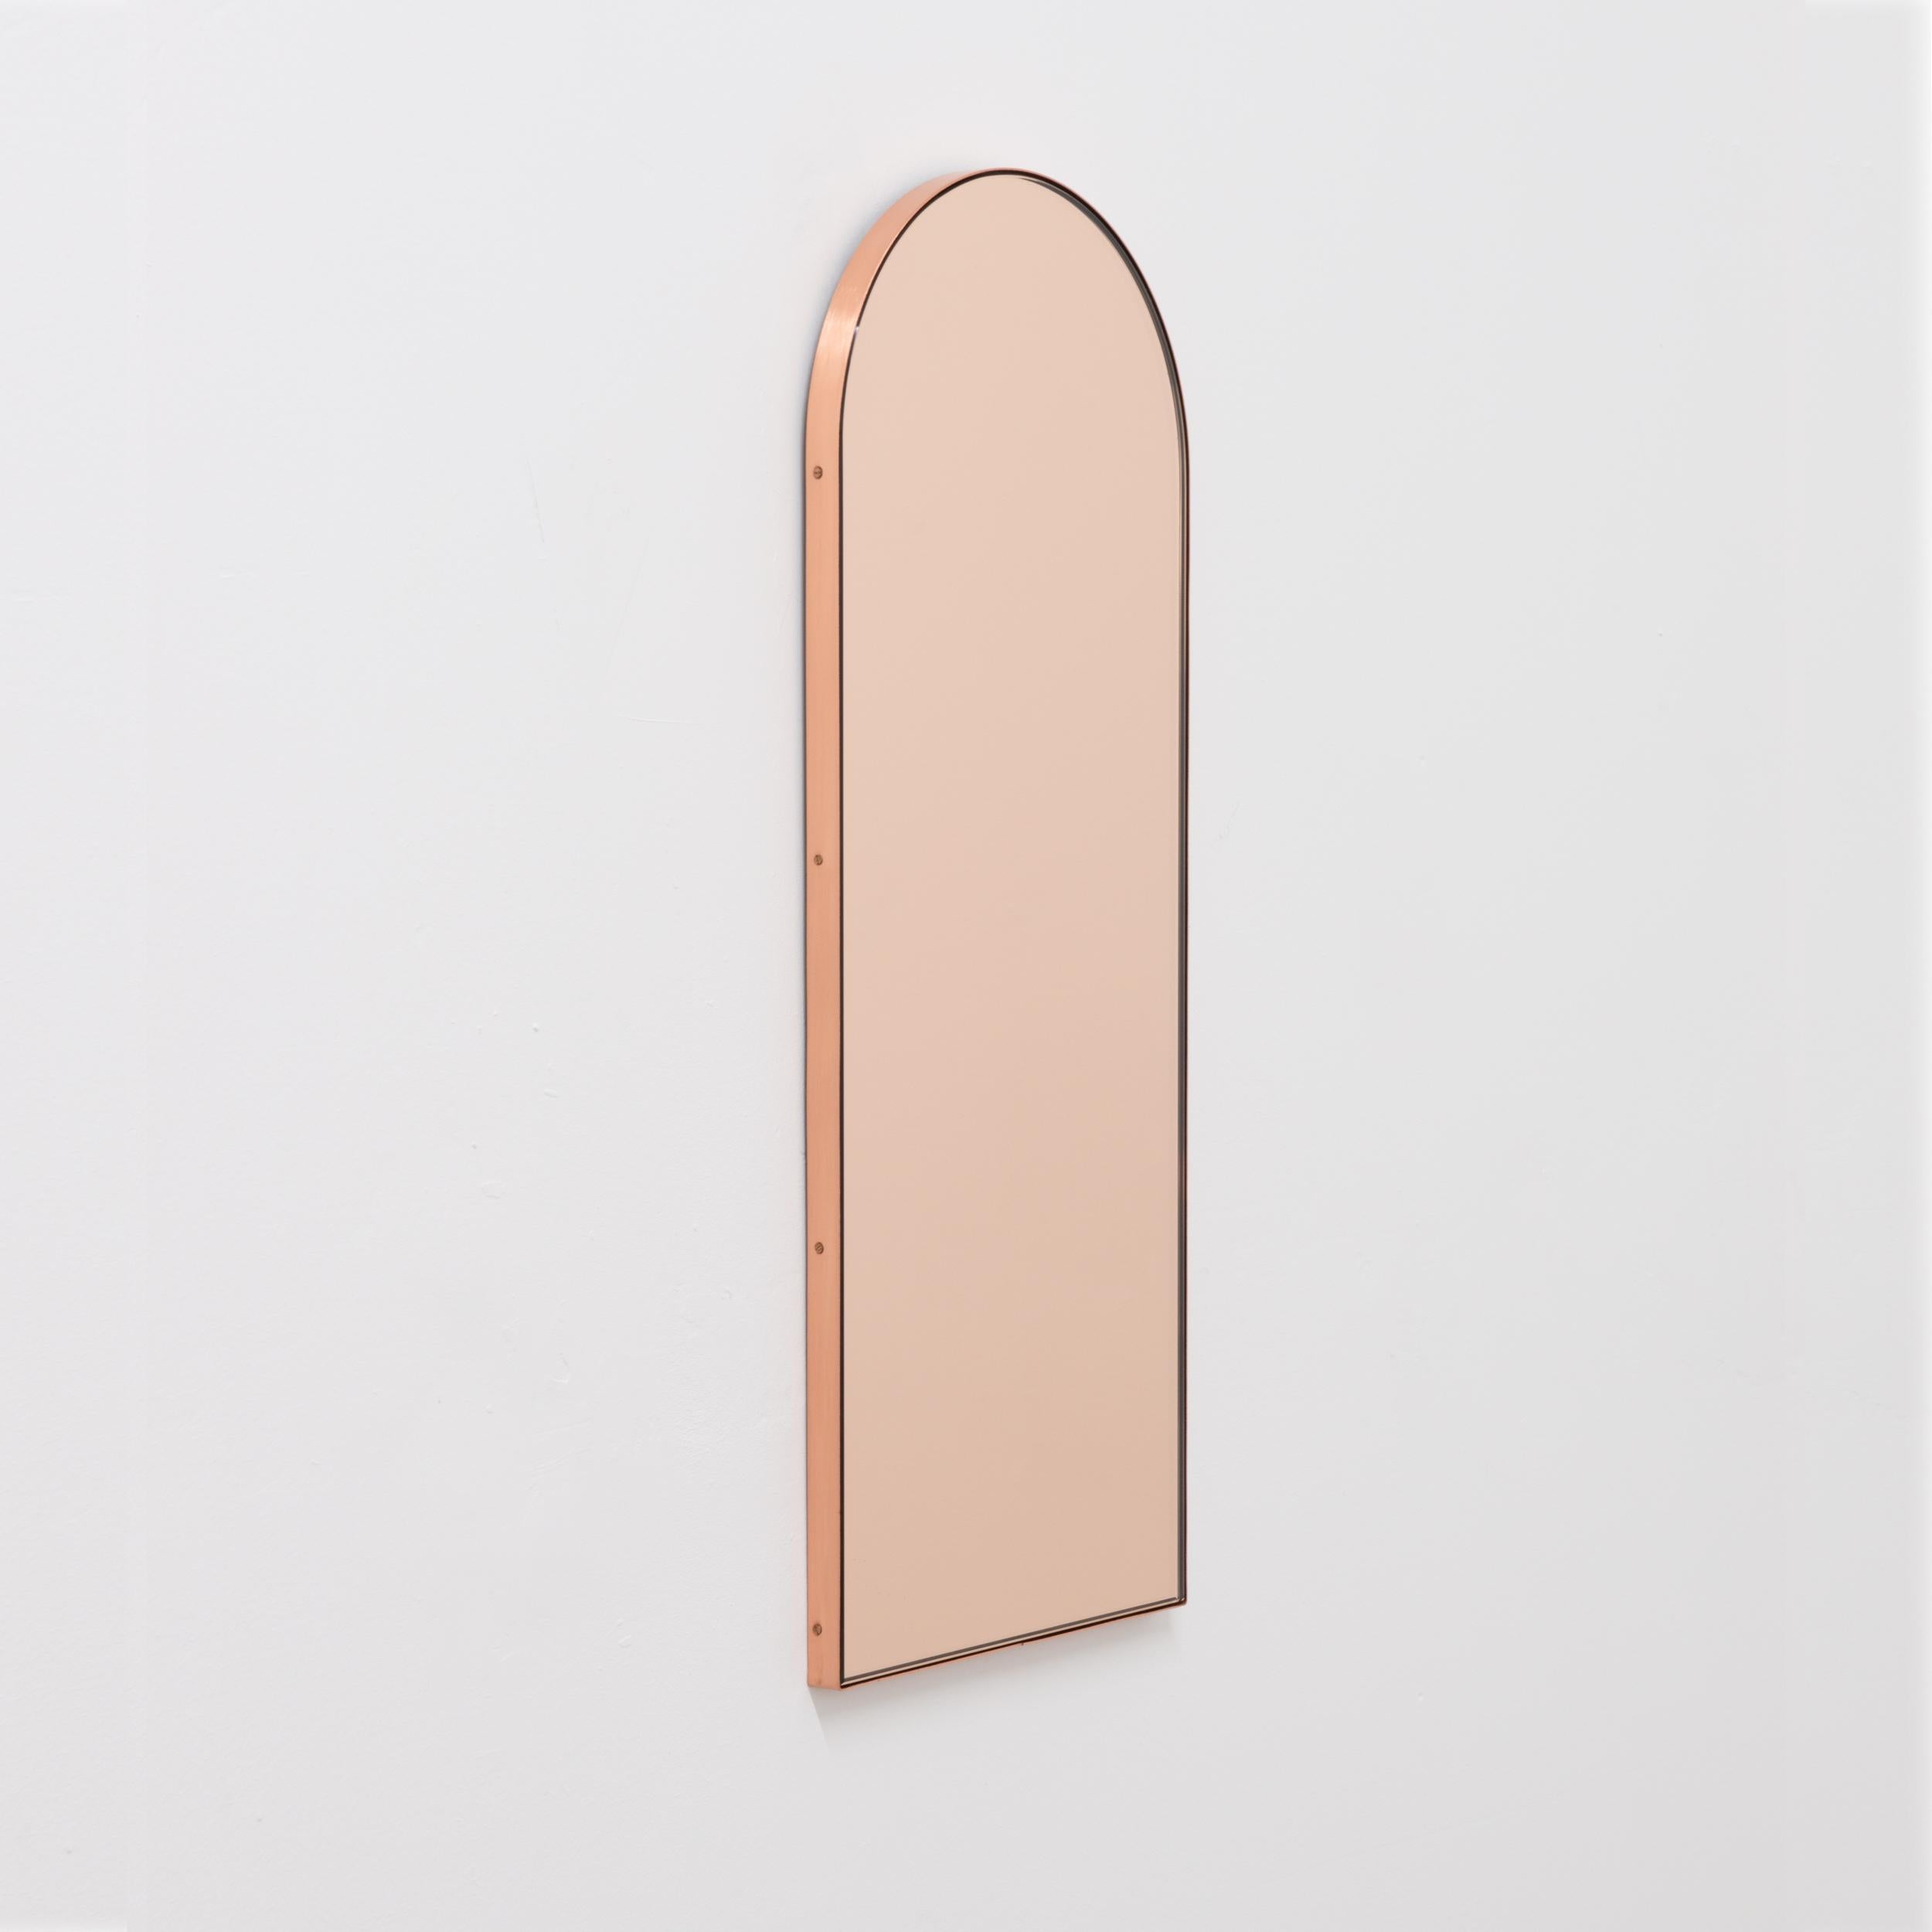 Contemporary arch shaped rose gold / peach mirror with an elegant solid brushed copper frame. Designed and handcrafted in London, UK.

Our mirrors are designed with an integrated French cleat (split batten) system that ensures the mirror is securely